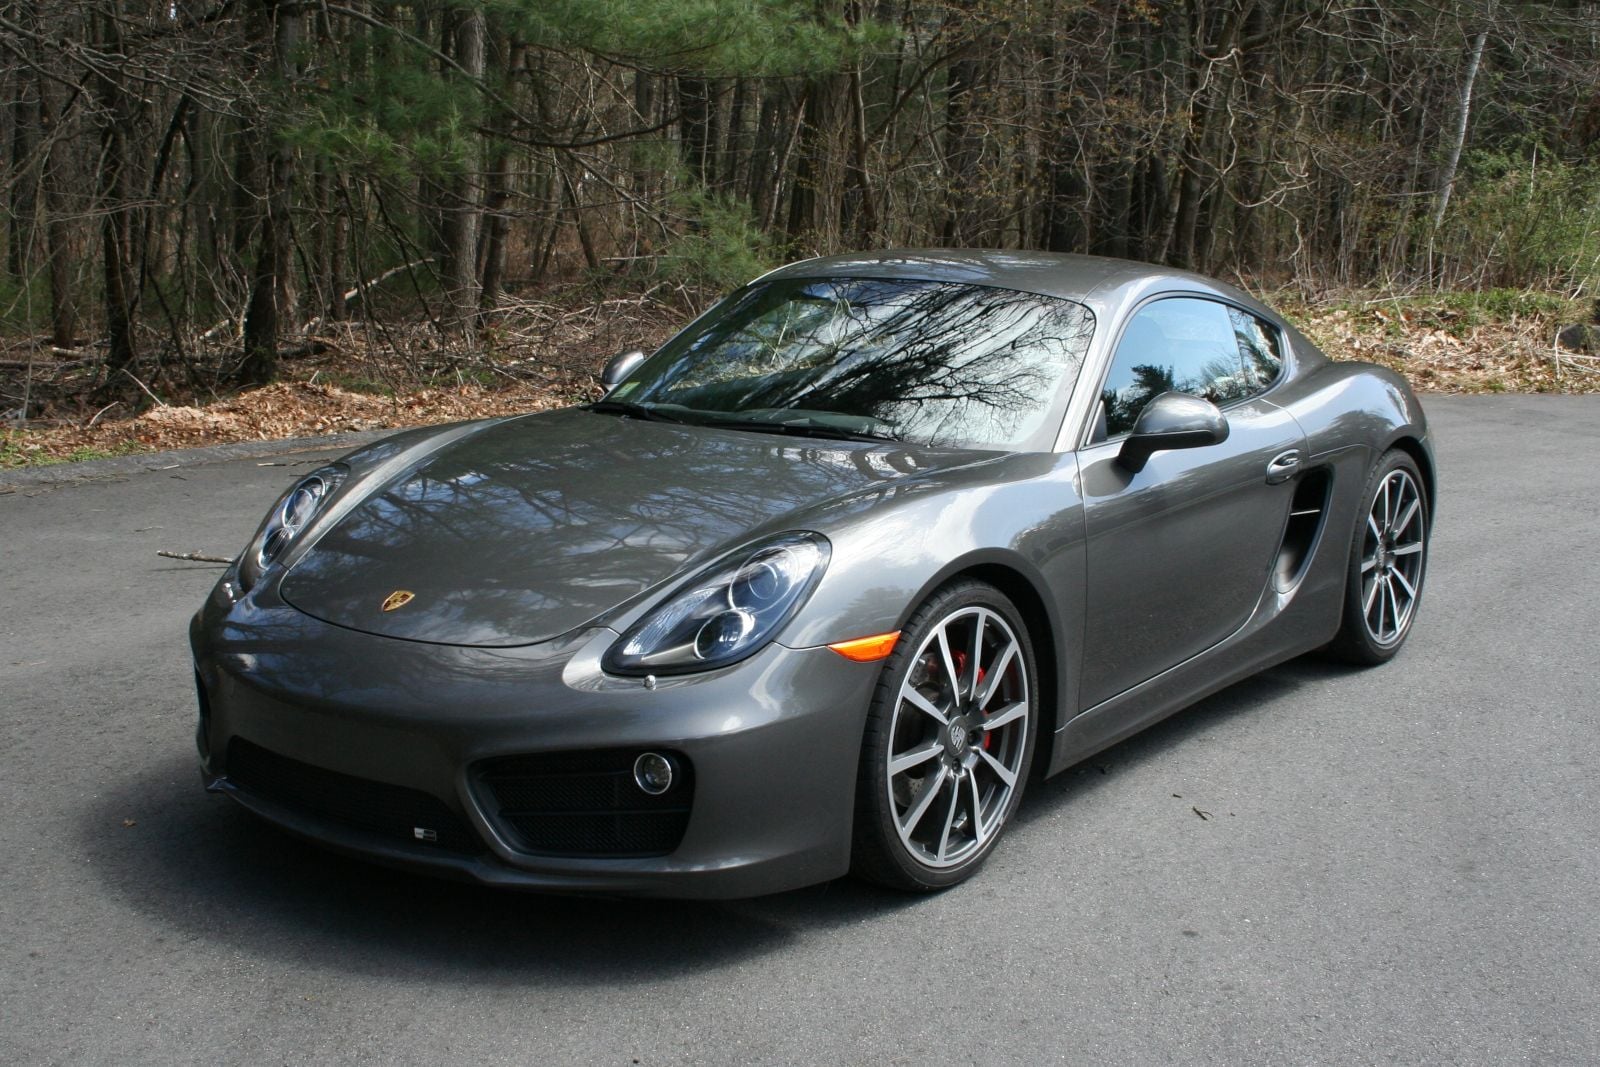 2014 Porsche Cayman -  - Used - VIN WP0AB2A87EK191328 - 14,073 Miles - 6 cyl - 2WD - Automatic - Coupe - Gray - Billerica, MA 01821, United States